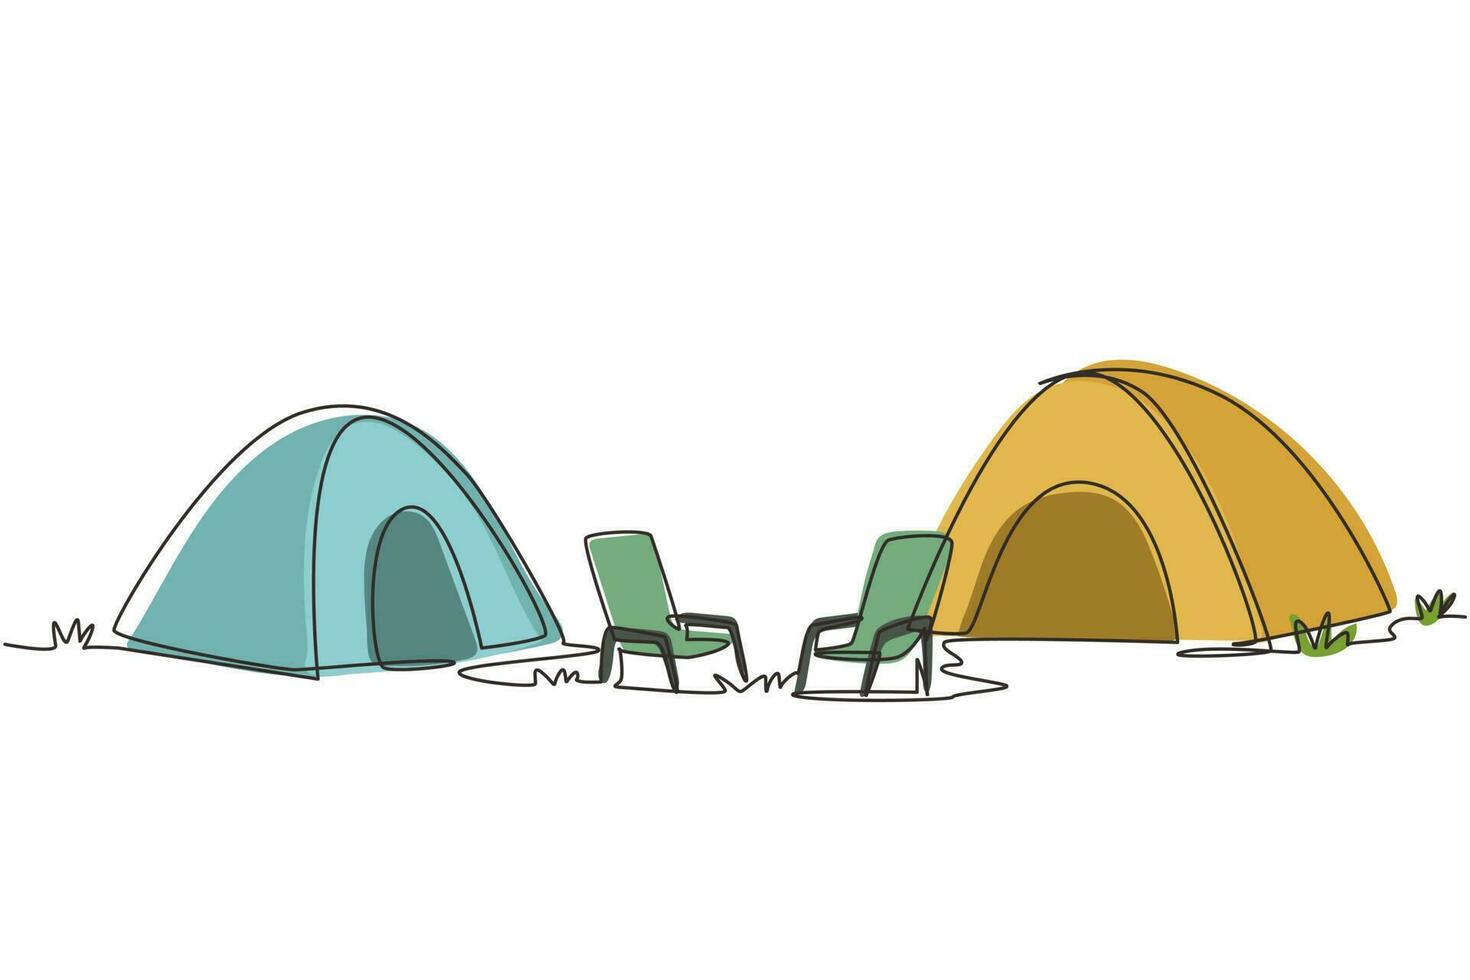 Single one line drawing camping landscape in campsite ground. Pair of tents with two chair in forest on grass. Summer camping on nature. Eco tourism. Continuous line draw design vector illustration